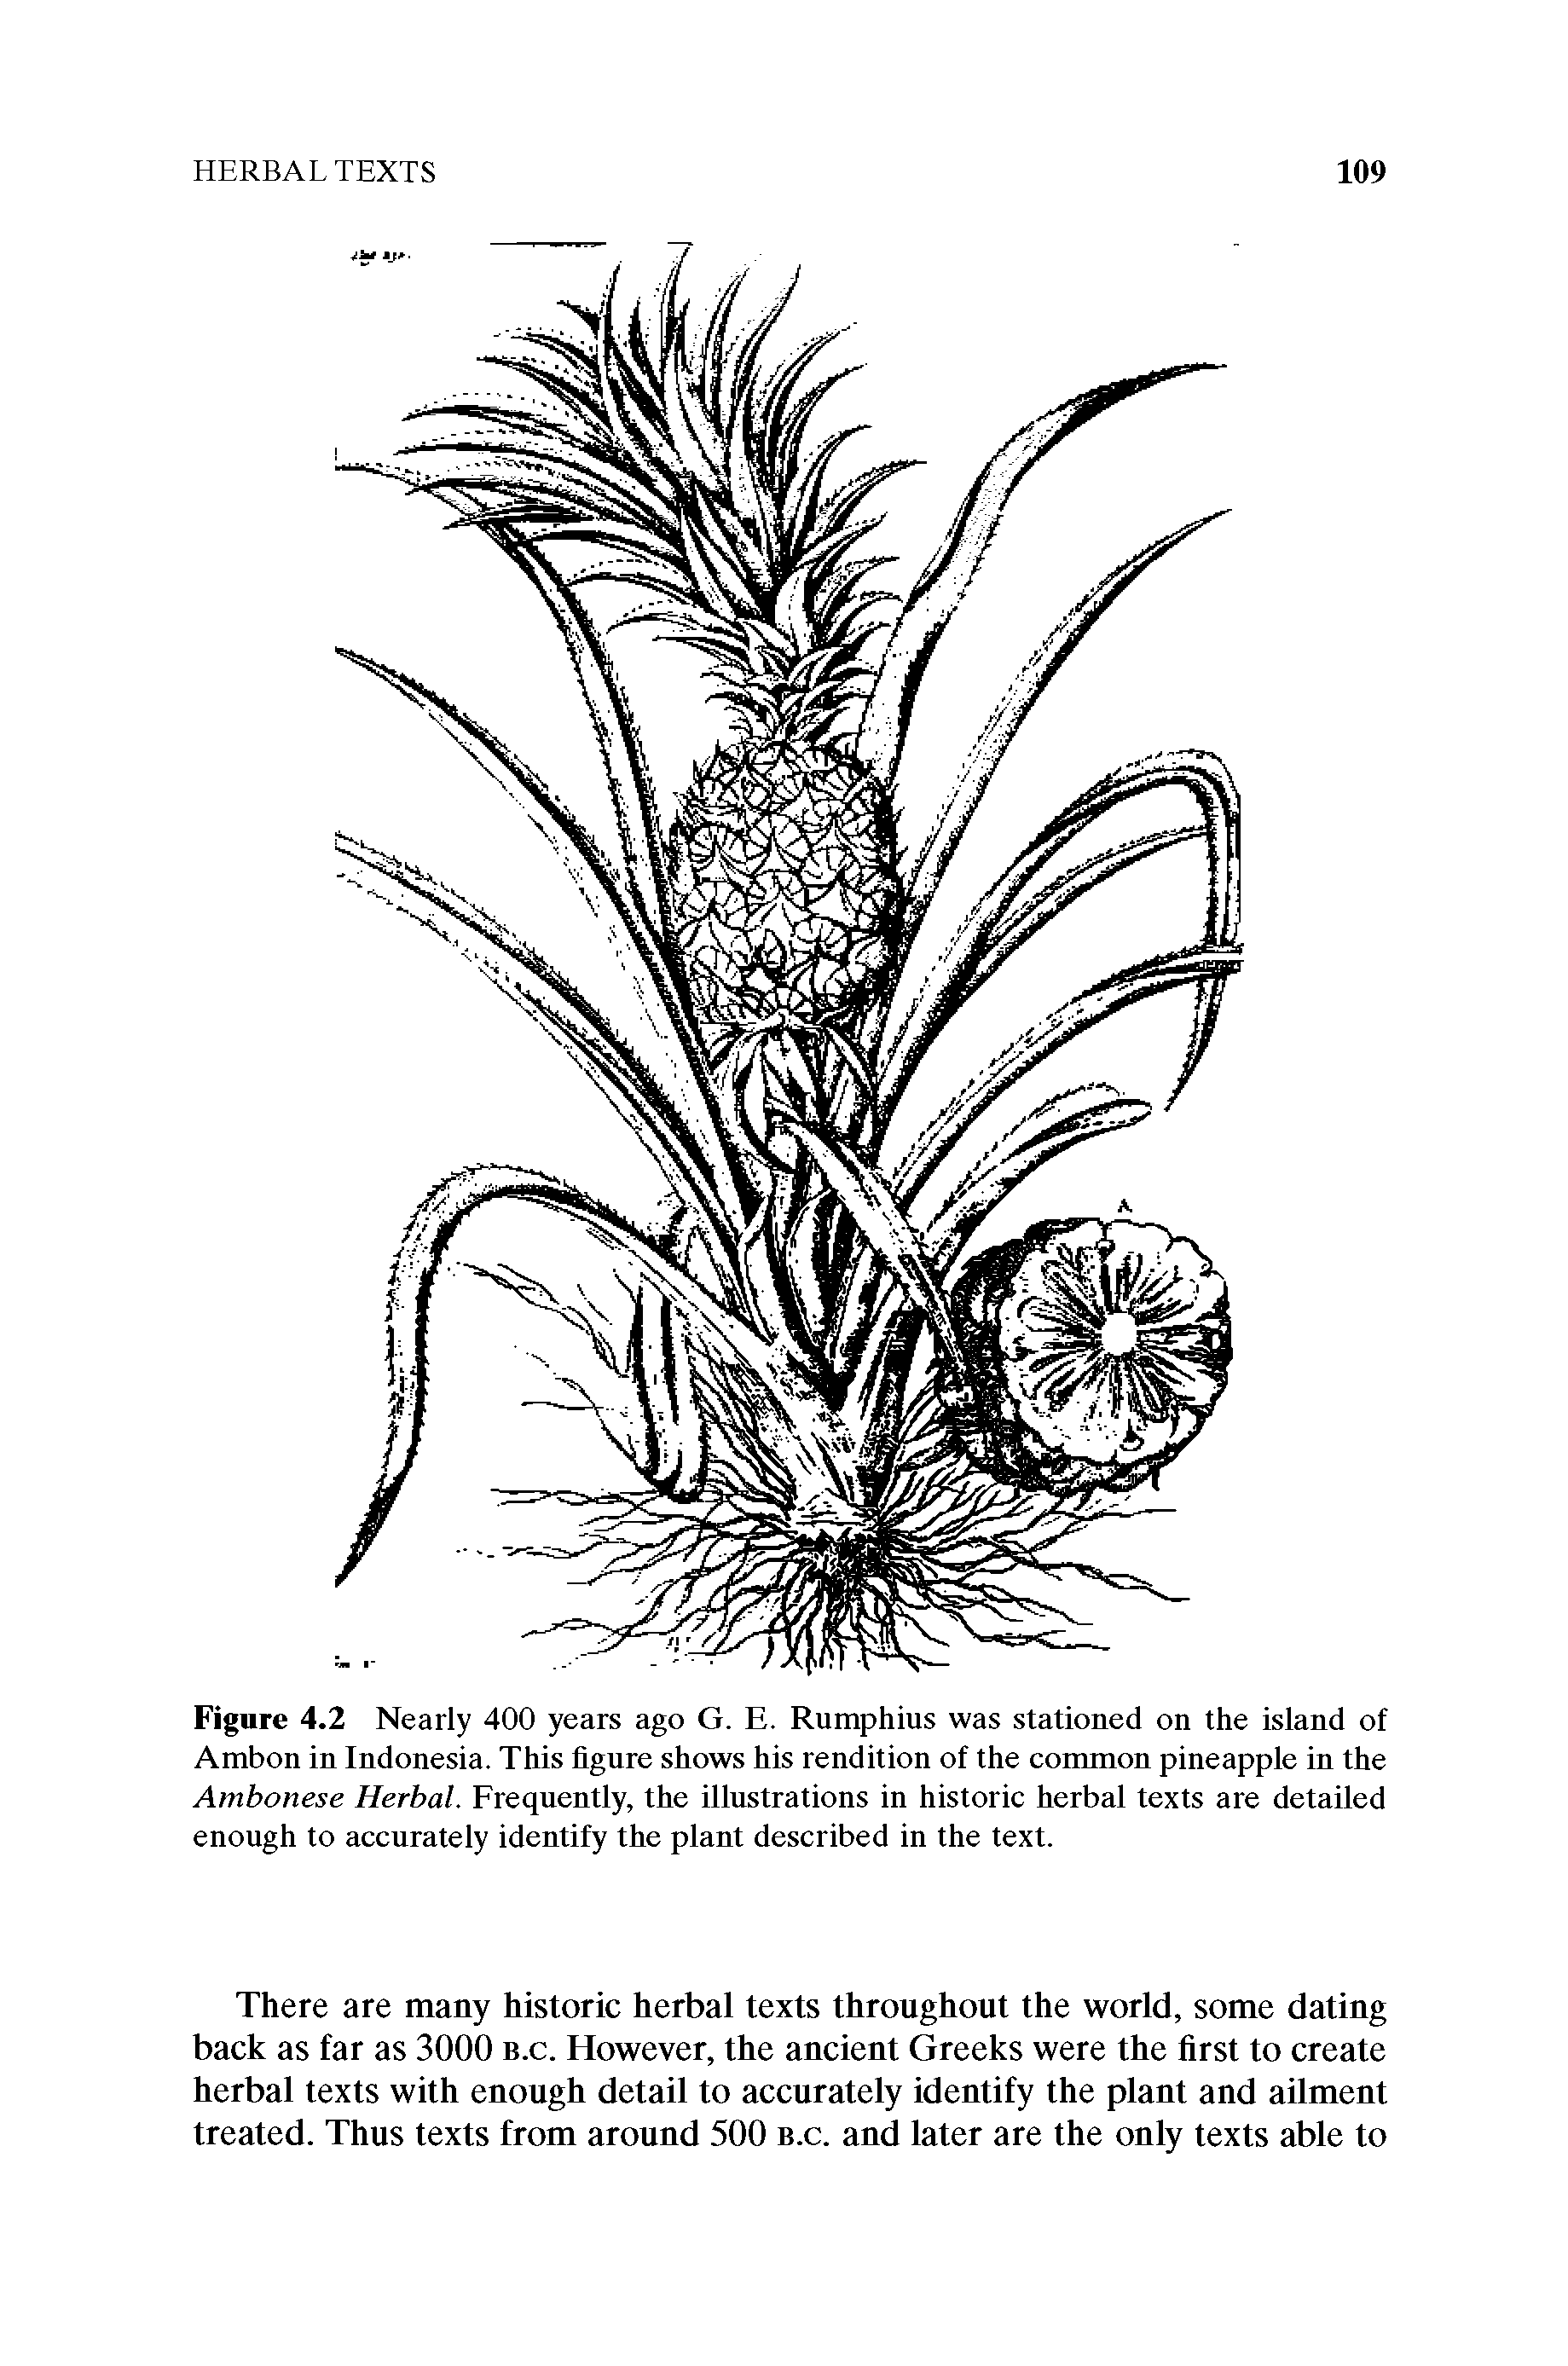 Figure 4.2 Nearly 400 years ago G. E. Rumphius was stationed on the island of Ambon in Indonesia. This fignre shows his rendition of the common pineapple in the Ambonese Herbal. Freqnently, the illnstrations in historic herbal texts are detailed enough to accurately identify the plant described in the text.